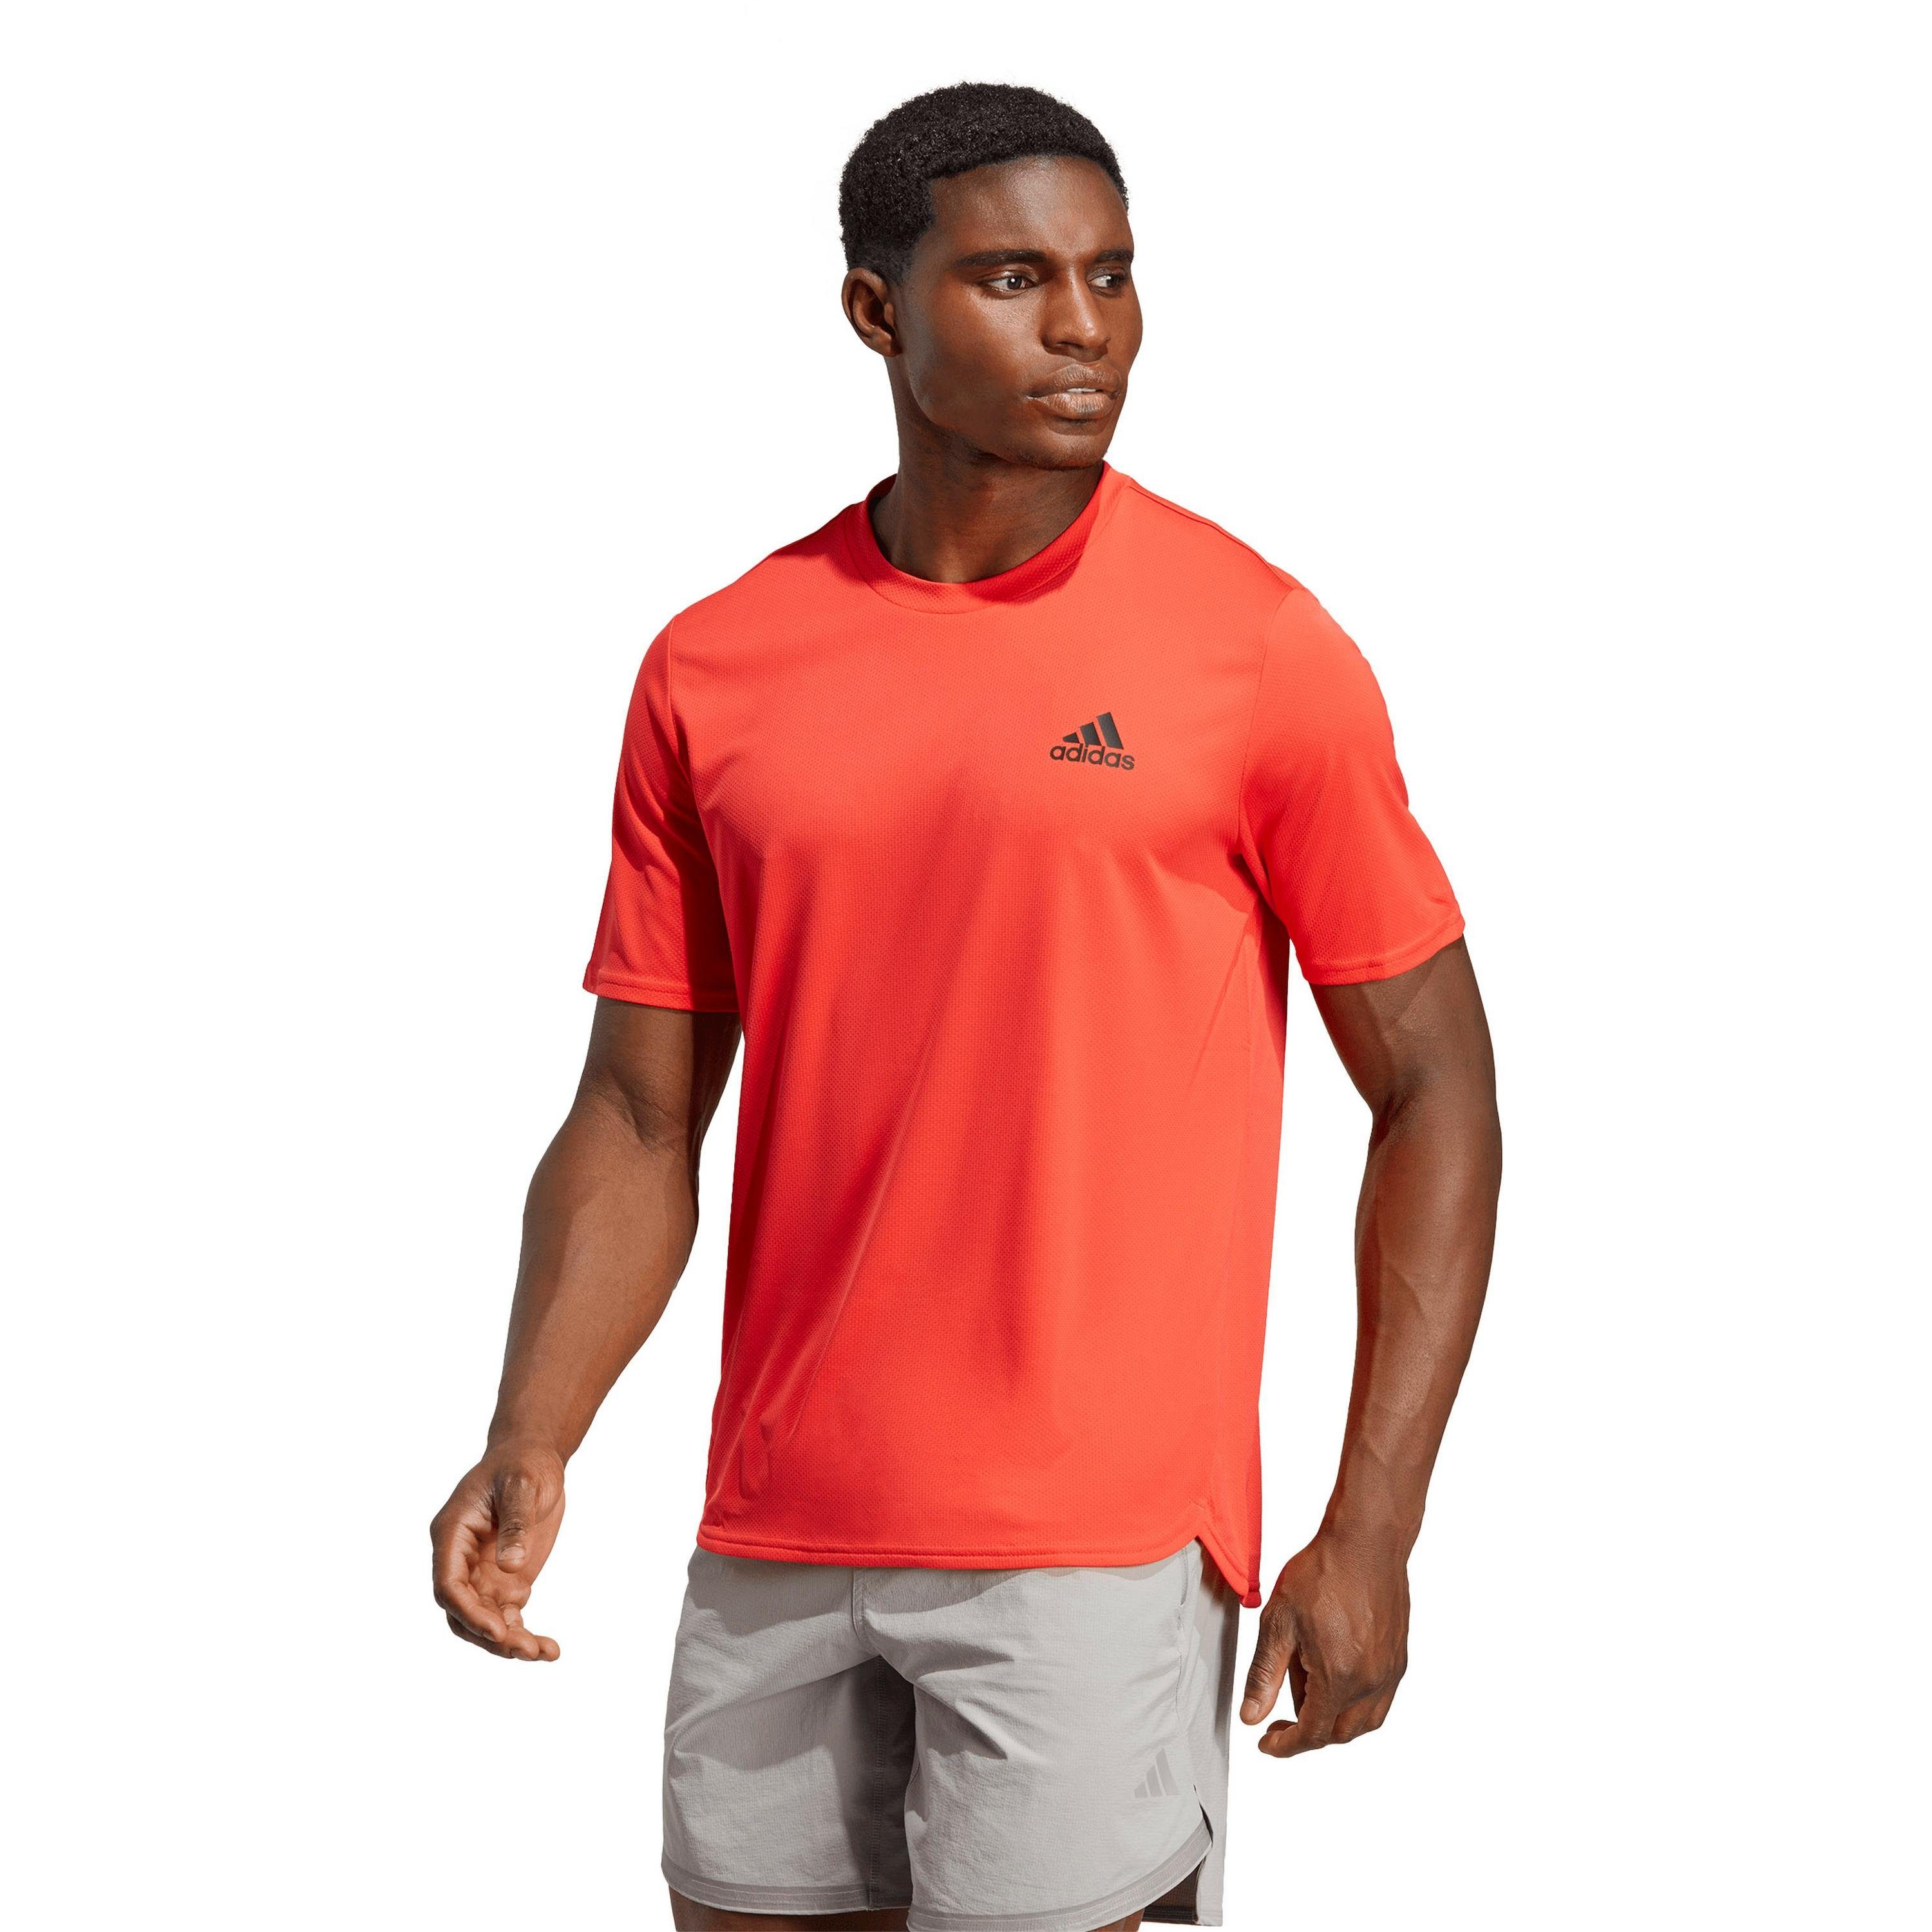 red-black Performance DESIGNED Funktionsshirt FOR adidas AEROREADY MOVEMENT bright